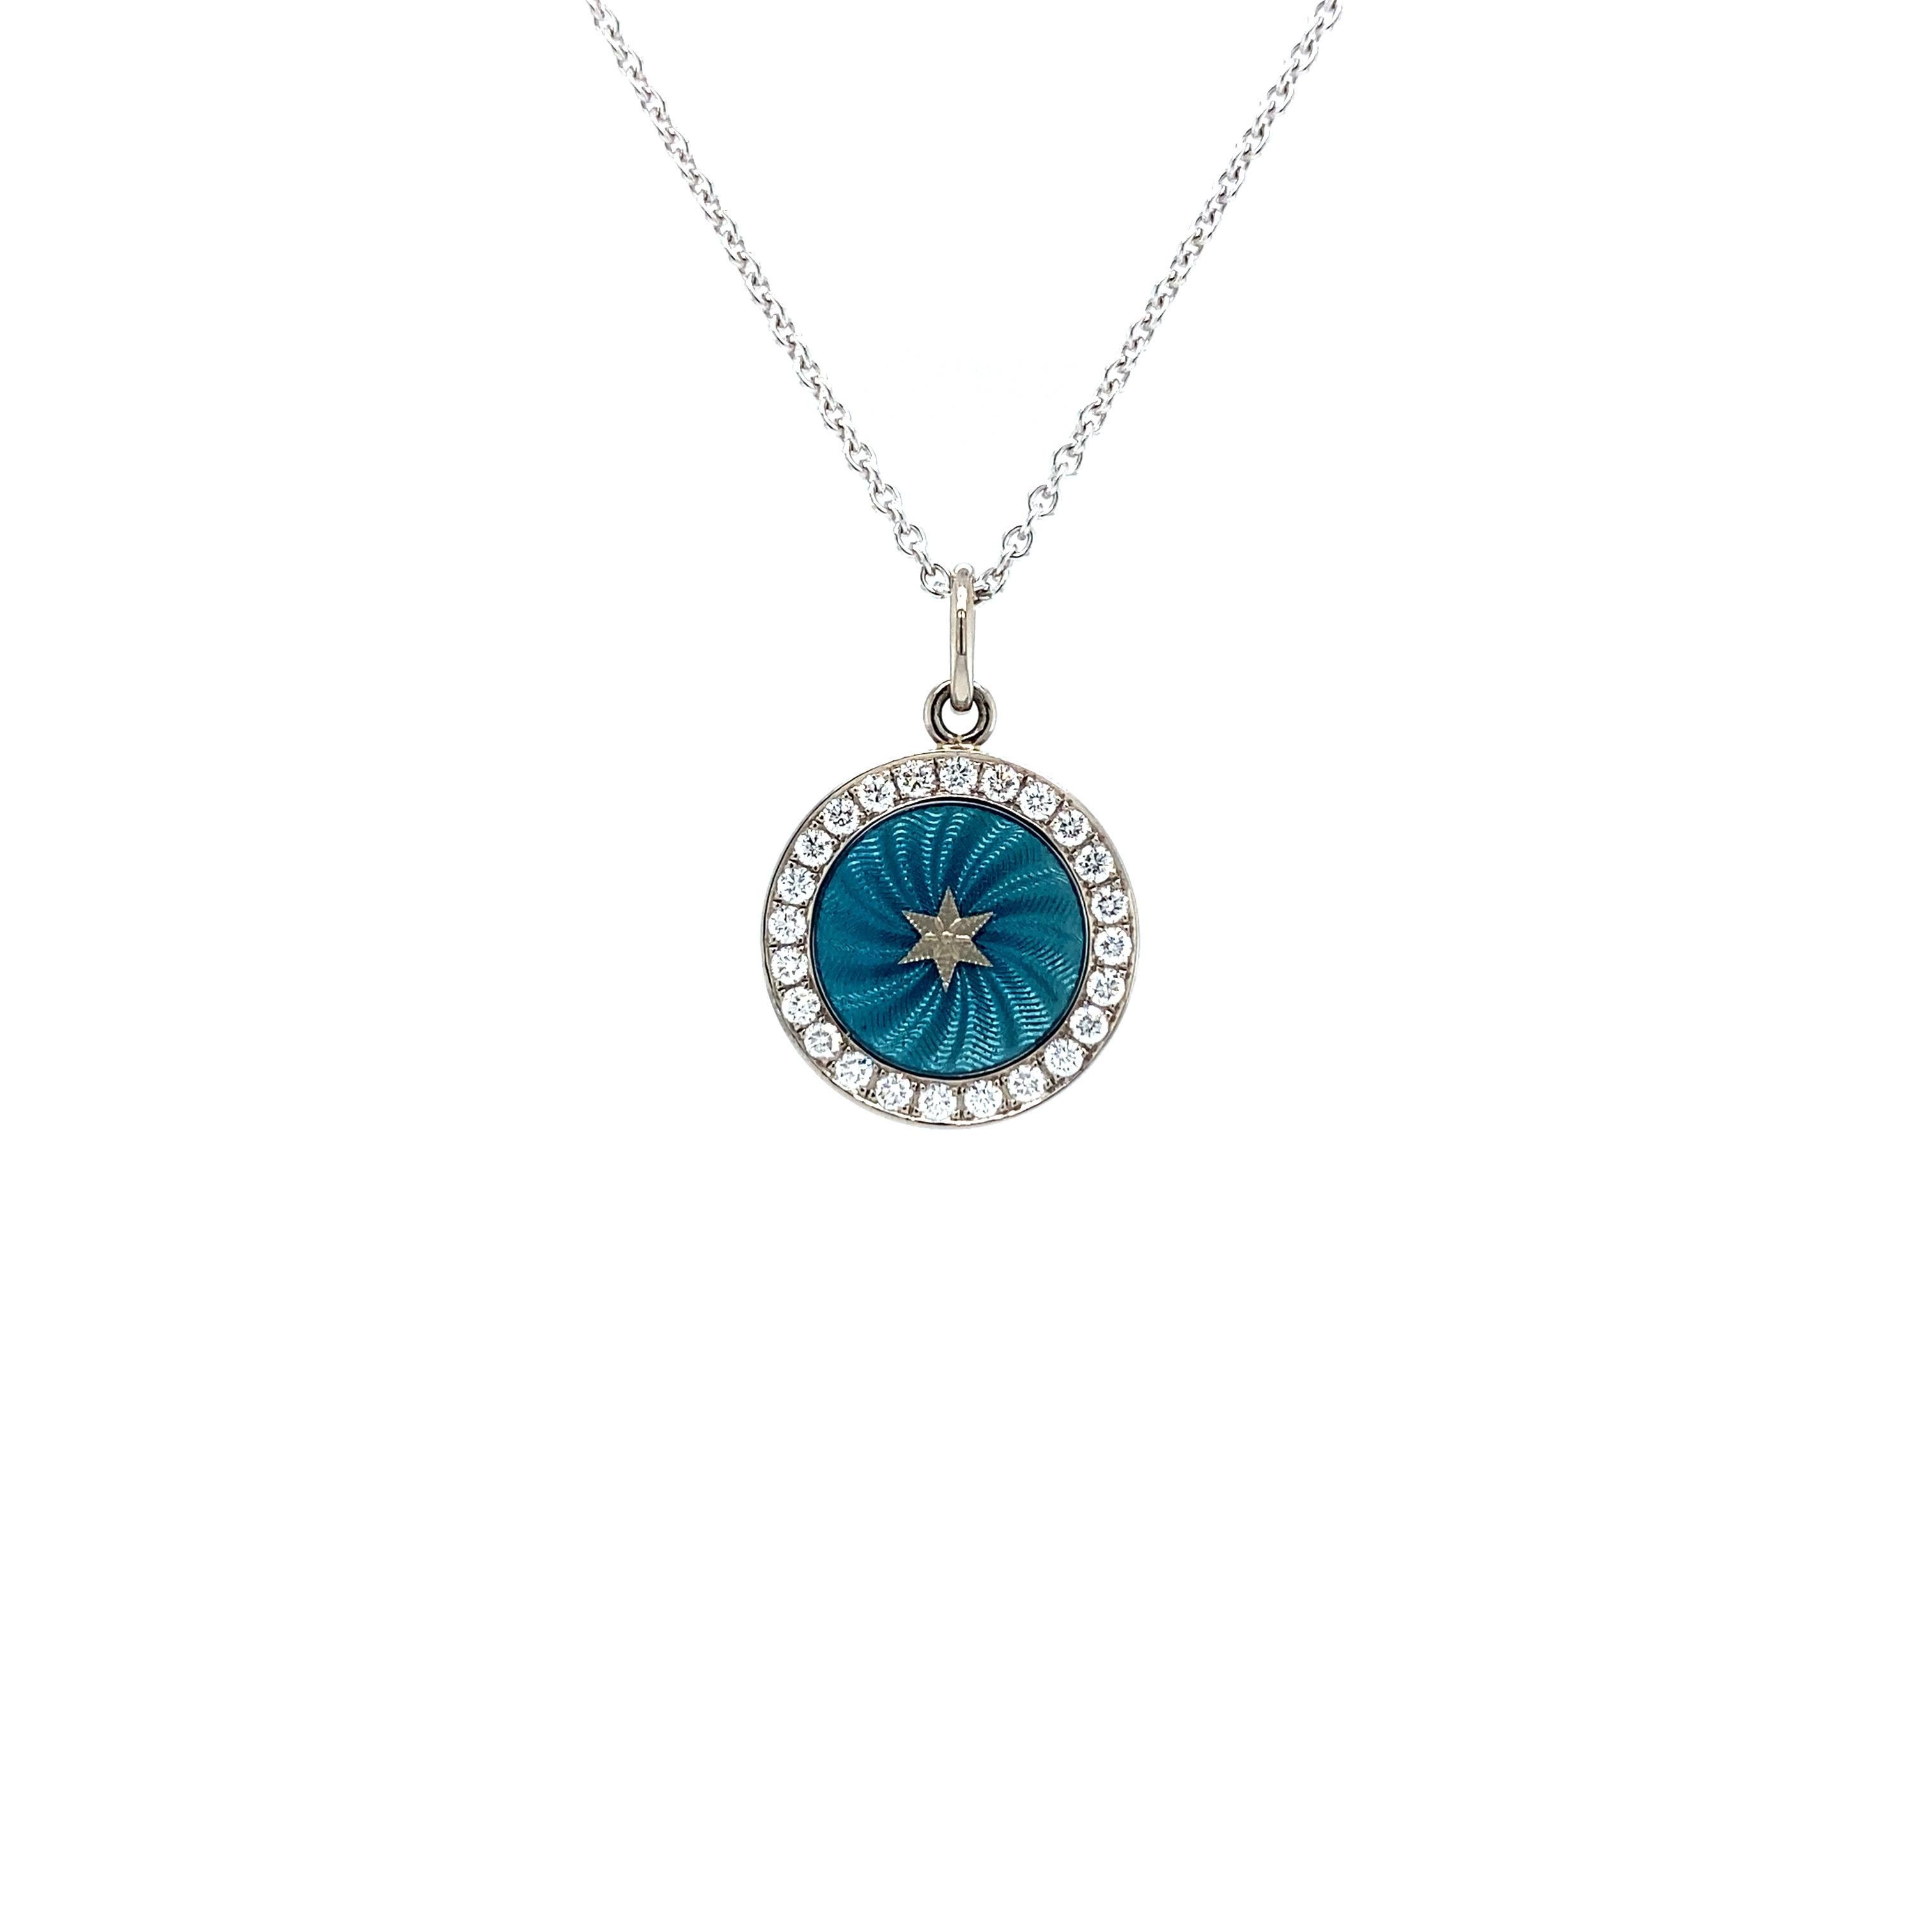 Round Disc Pendant with Star 18k White Gold Turquoise Enamel 24 Diamonds 0.36 ct In New Condition For Sale In Pforzheim, DE